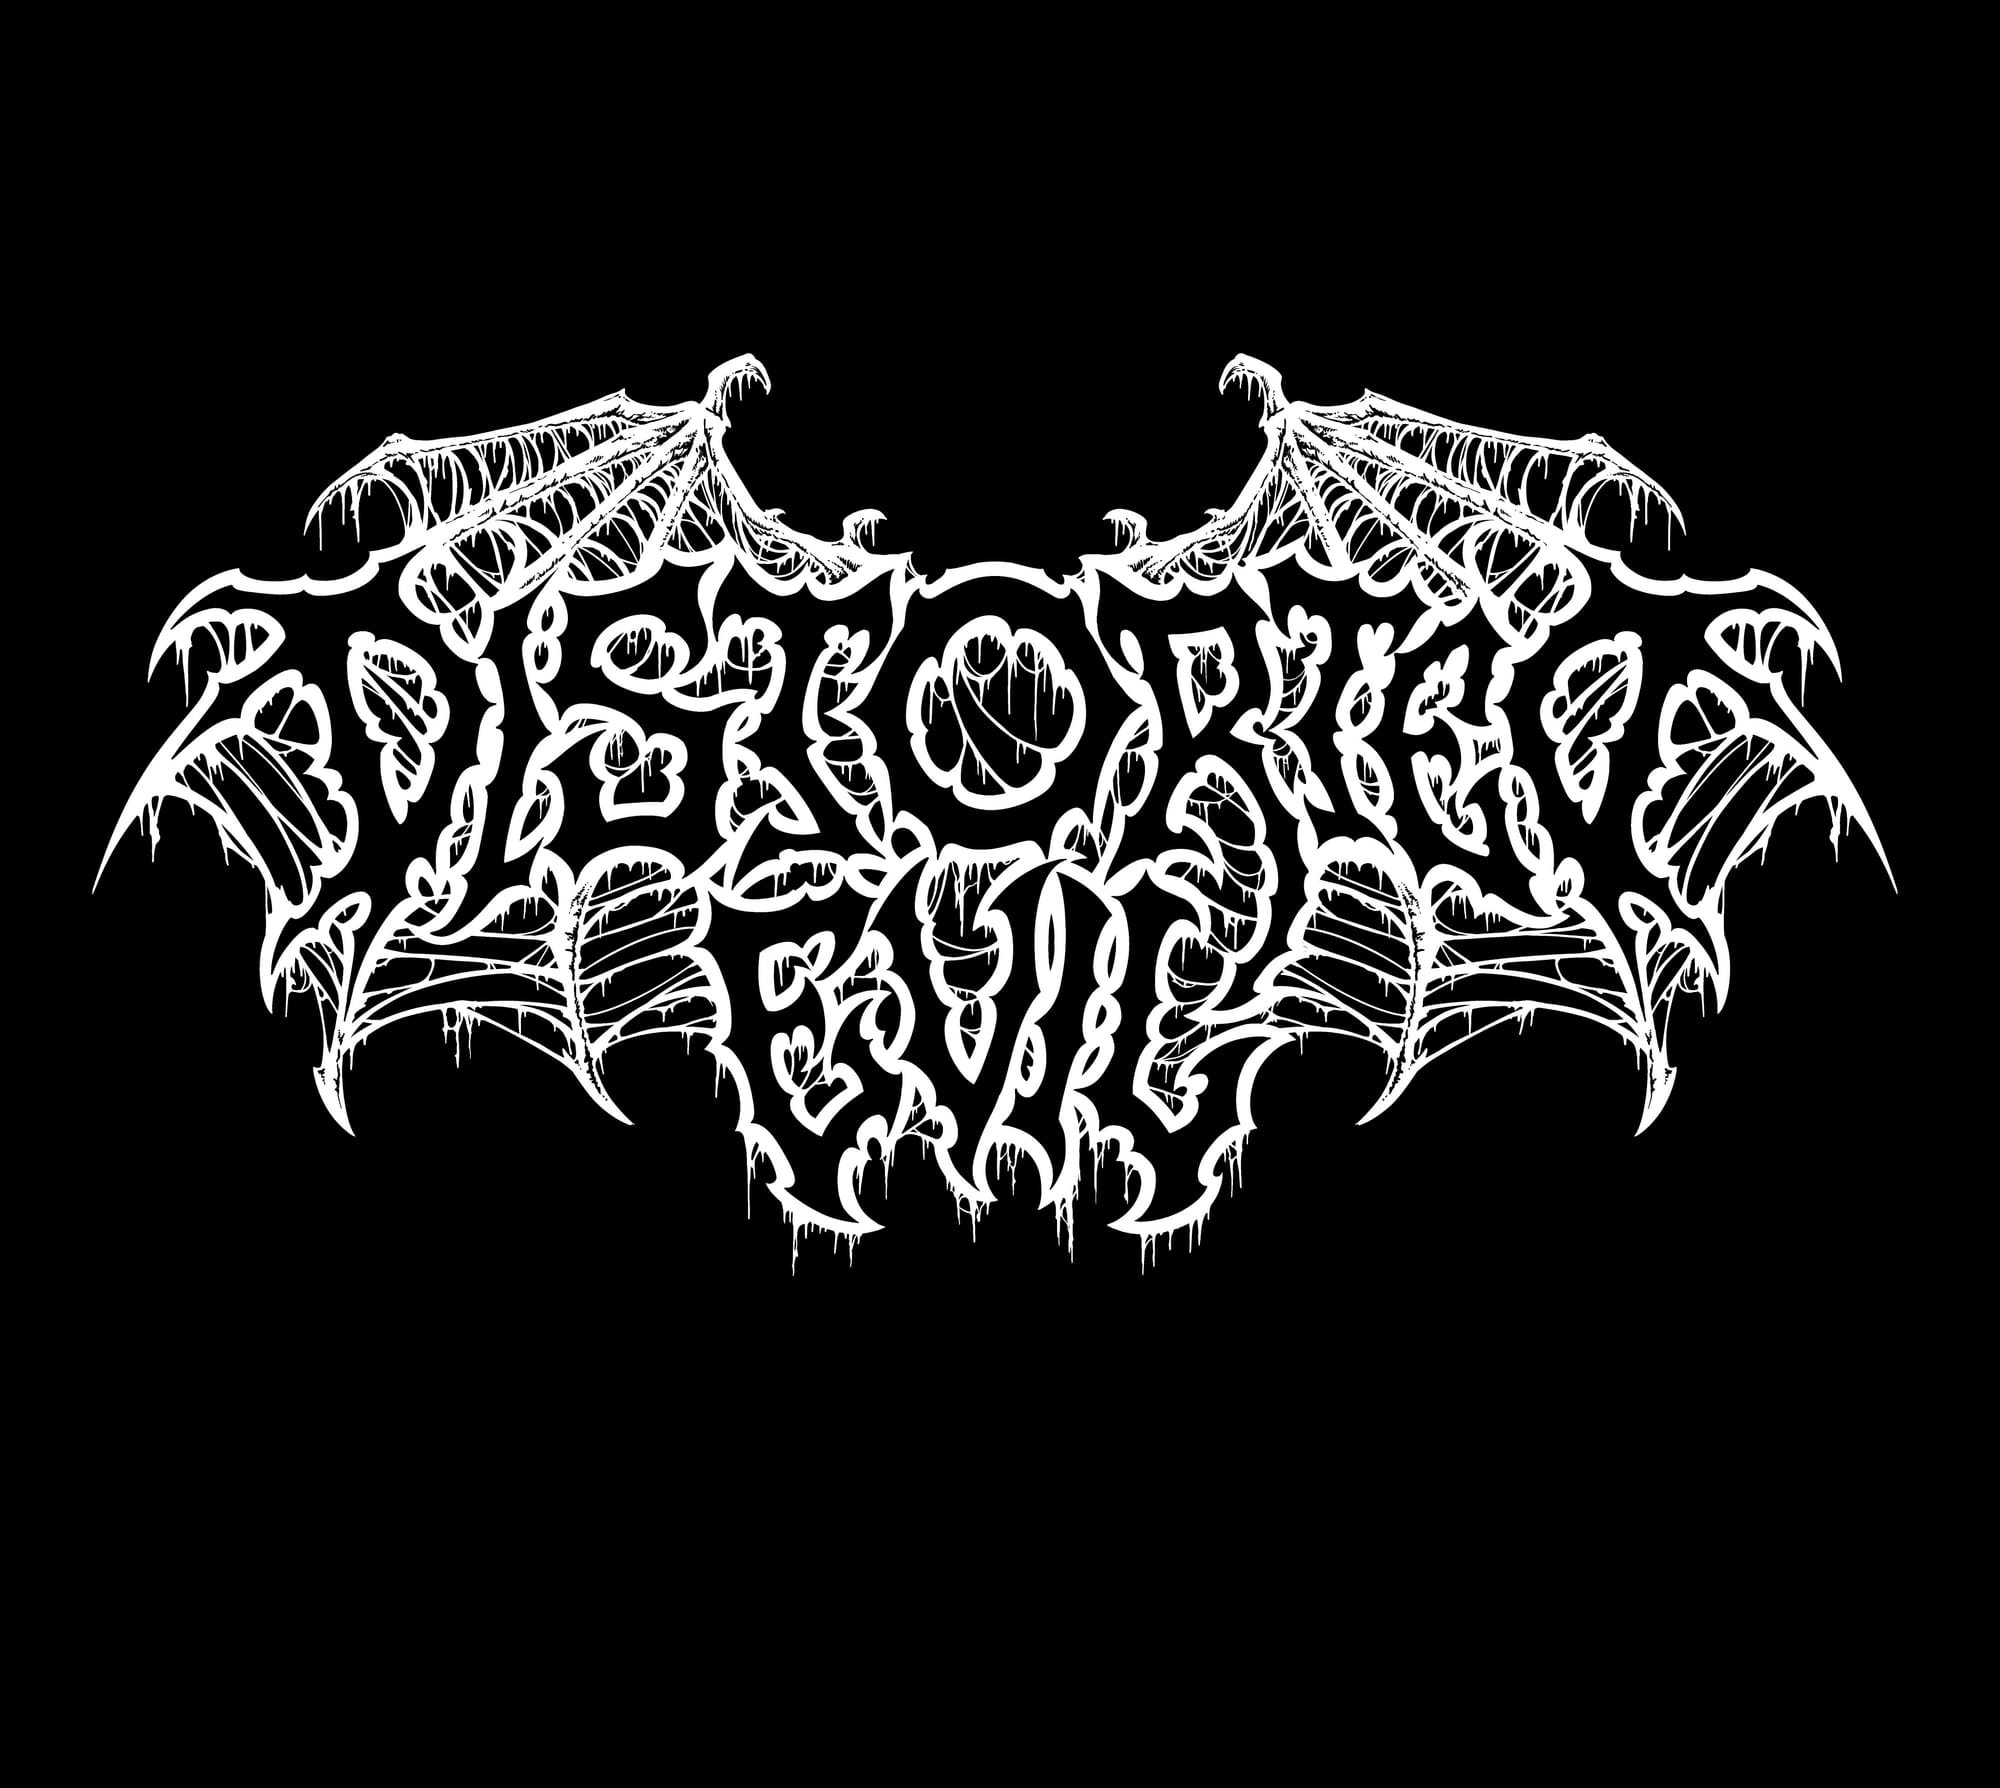 Interview with DISTORTED EVIL